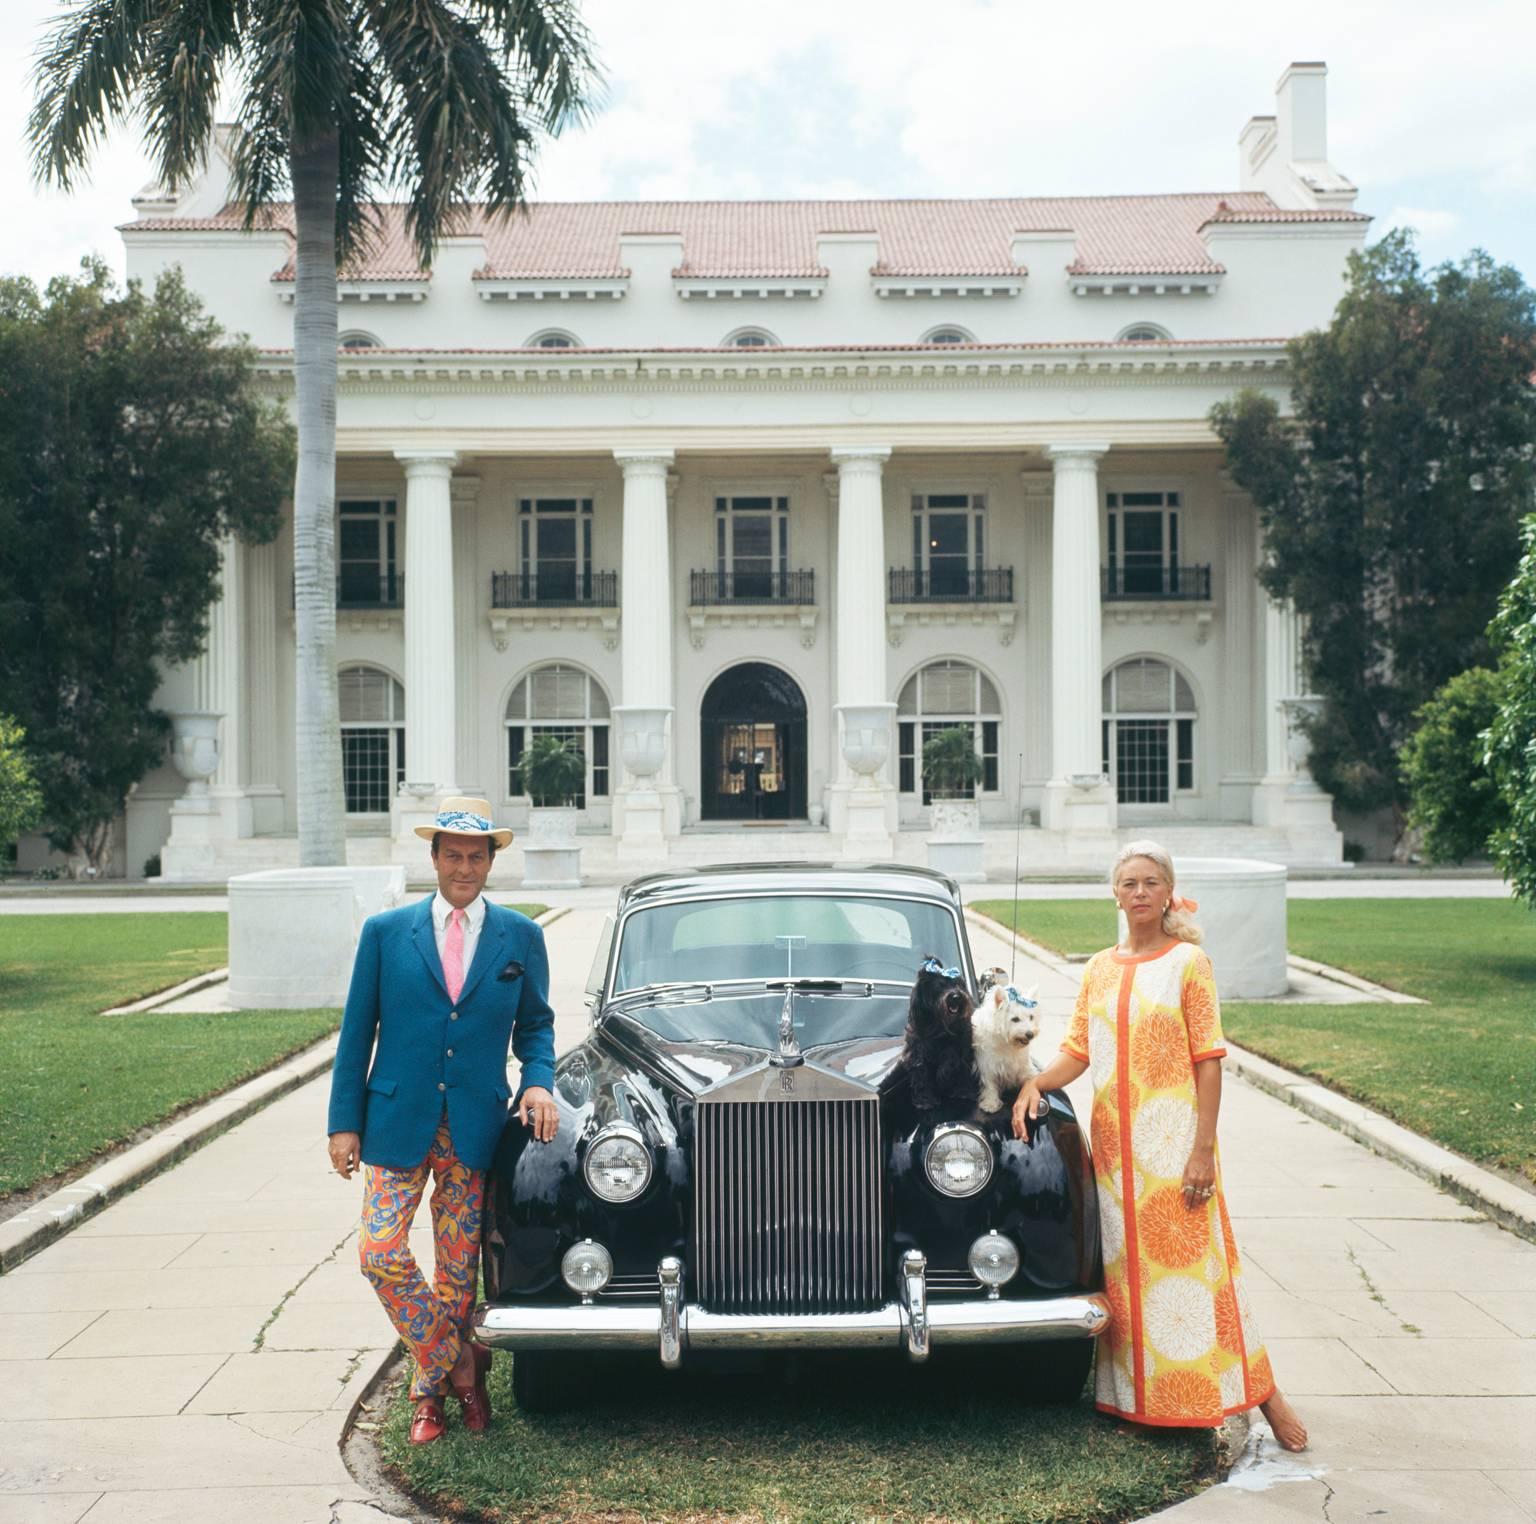 Slim Aarons Color Photograph - 'Donald Leas' Palm Beach 1968  (Estate Stamped Edition)